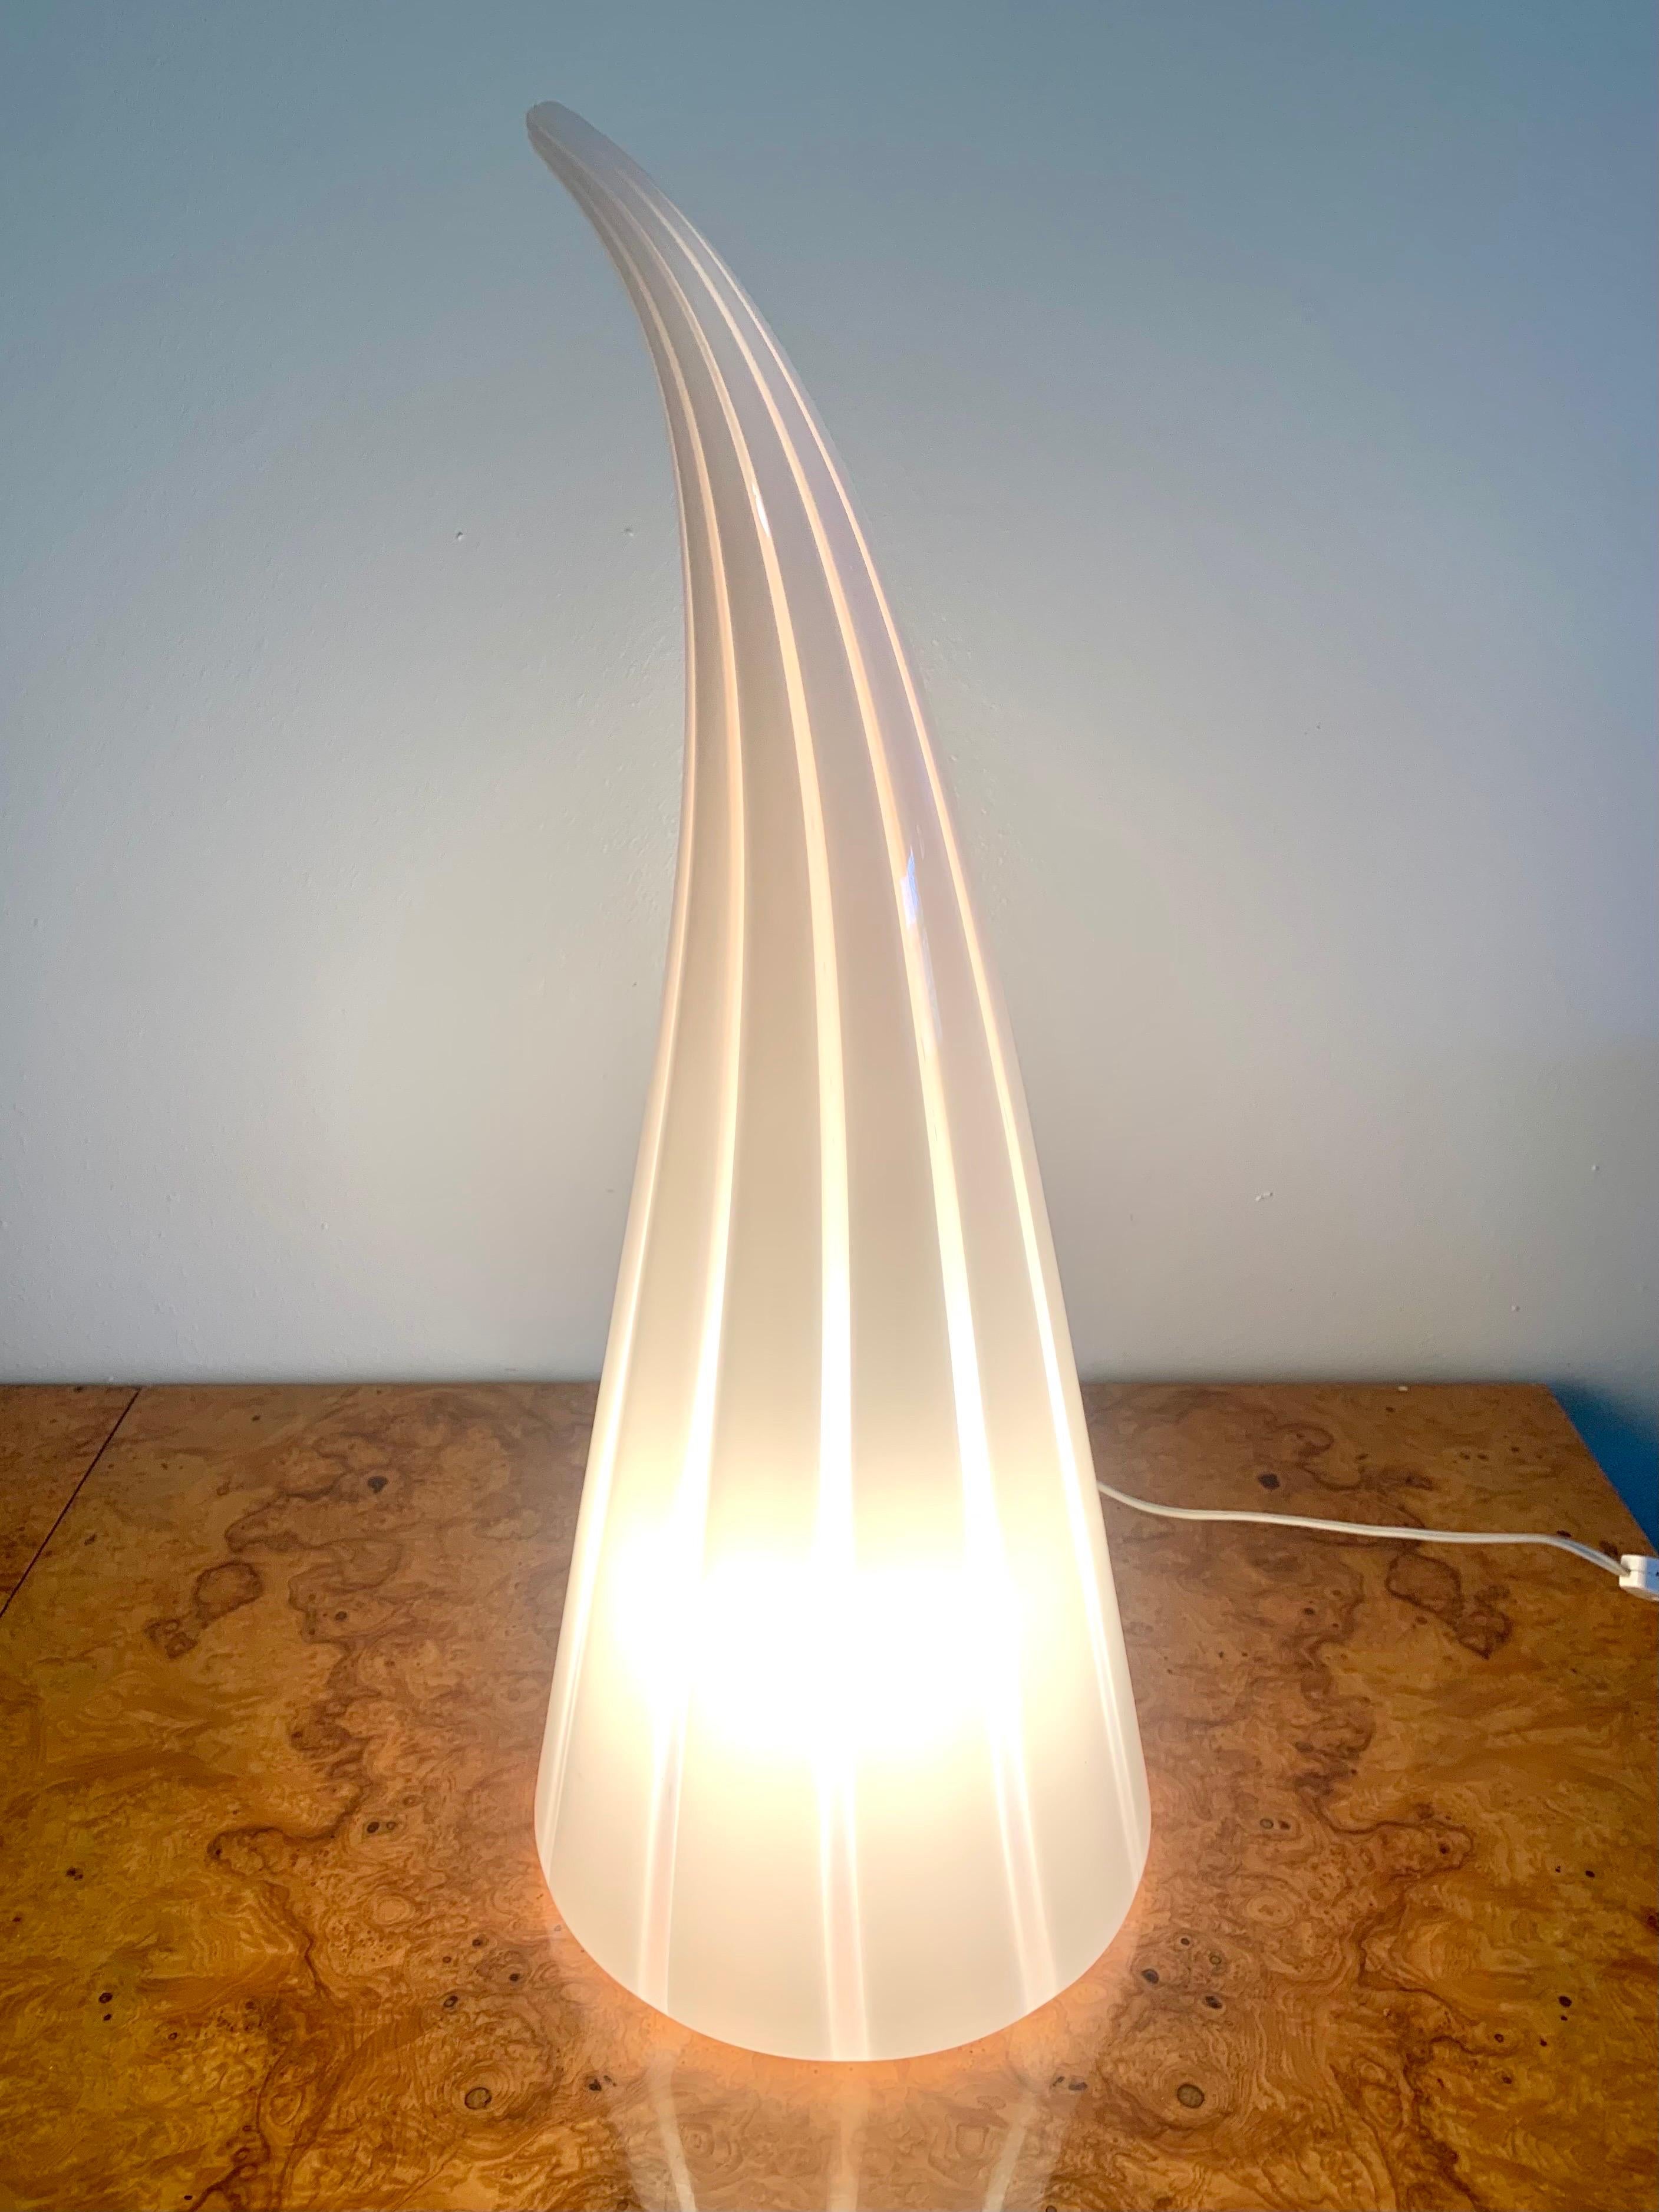 A stunning large striped and slightly swirled glass lamp. Unsure of exact studio but believed to be Vetri or Venini. Large scale horn design of white and clear Murano glass. Can be used as a table or floor lamp. In excellent working condition.